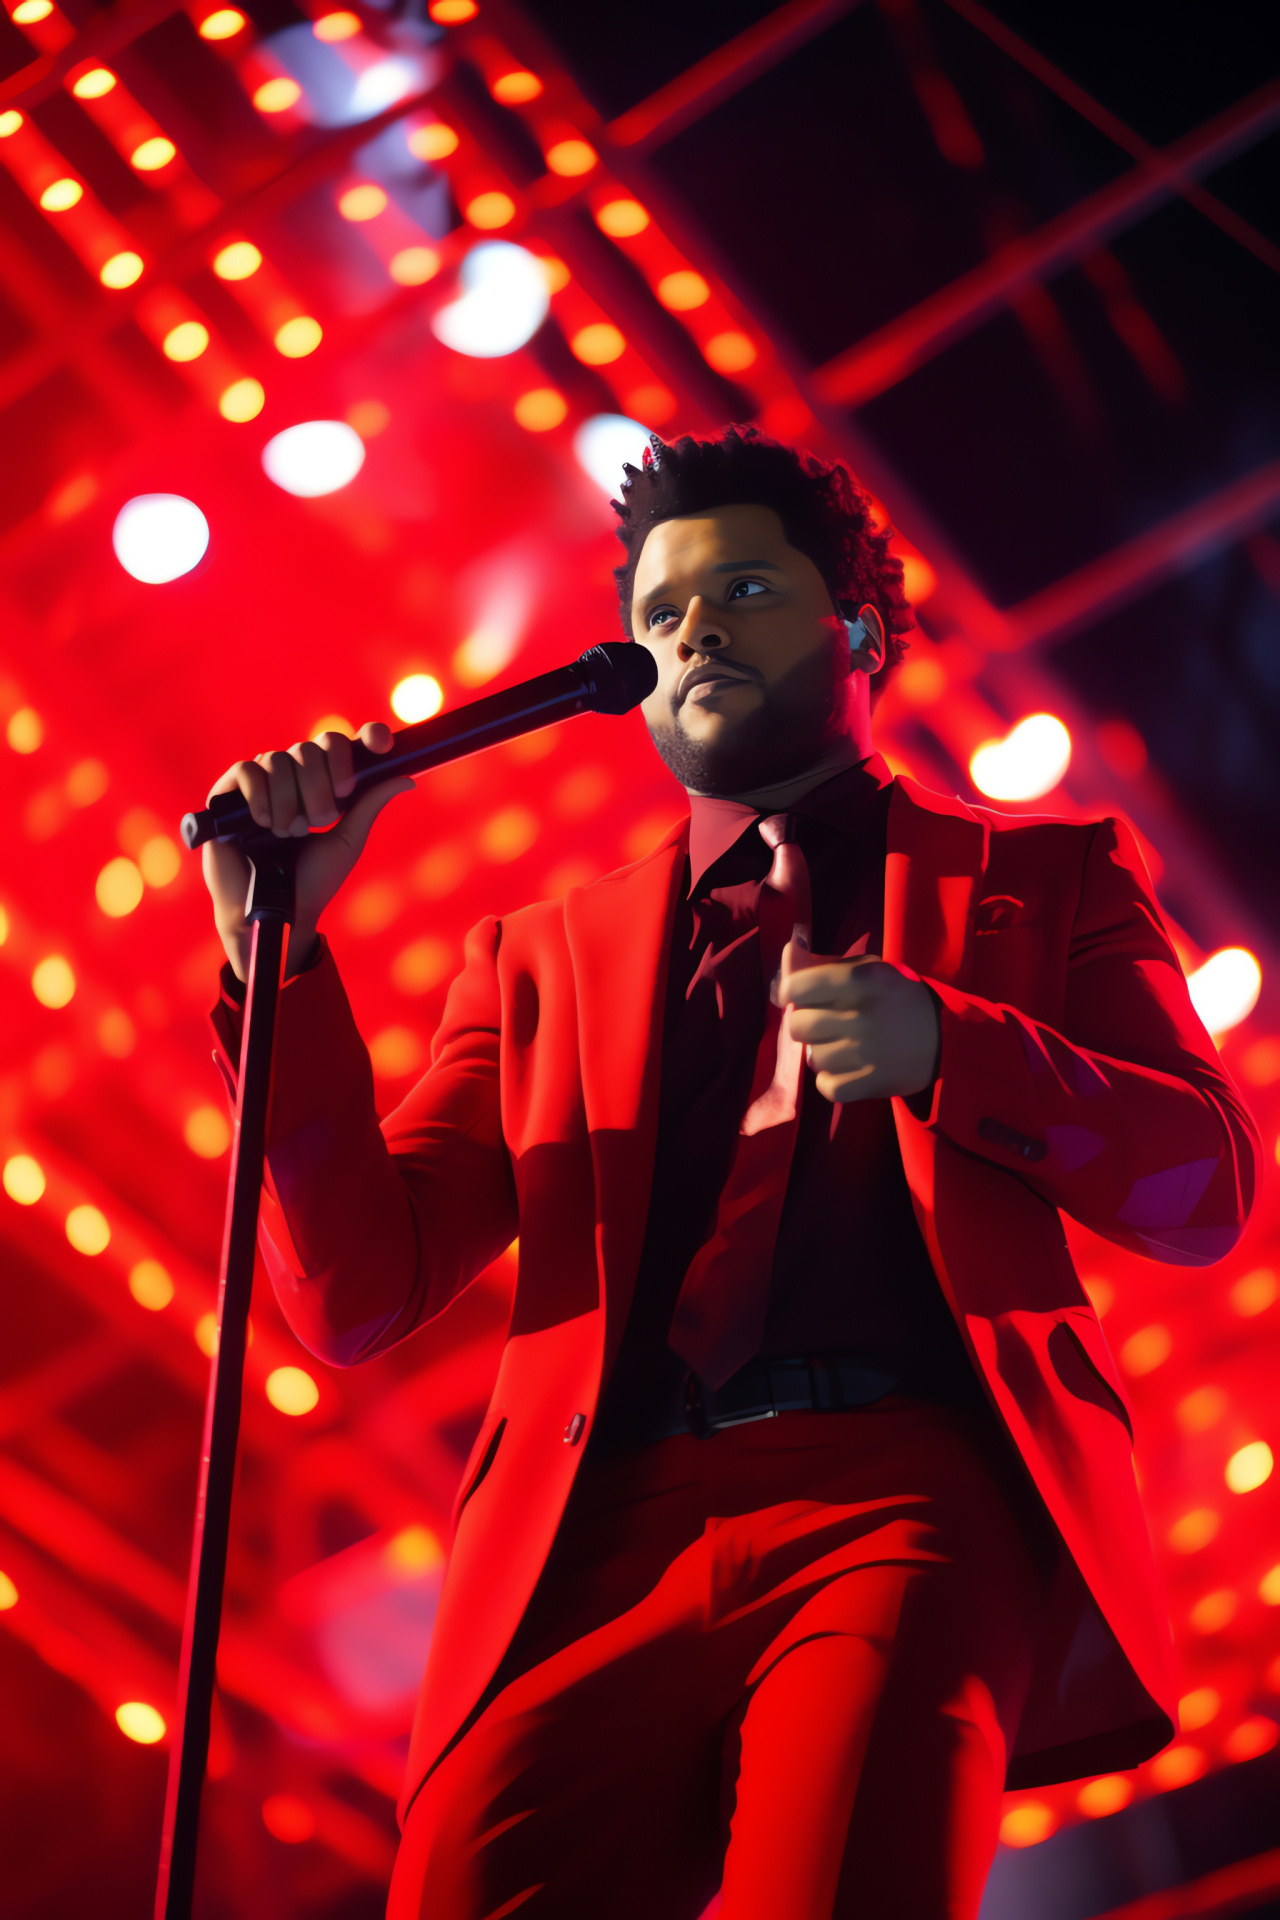 Entertainer The Weeknd, Super Bowl event, Stage lighting, Performer's costume, Singing artist, HD Phone Wallpaper